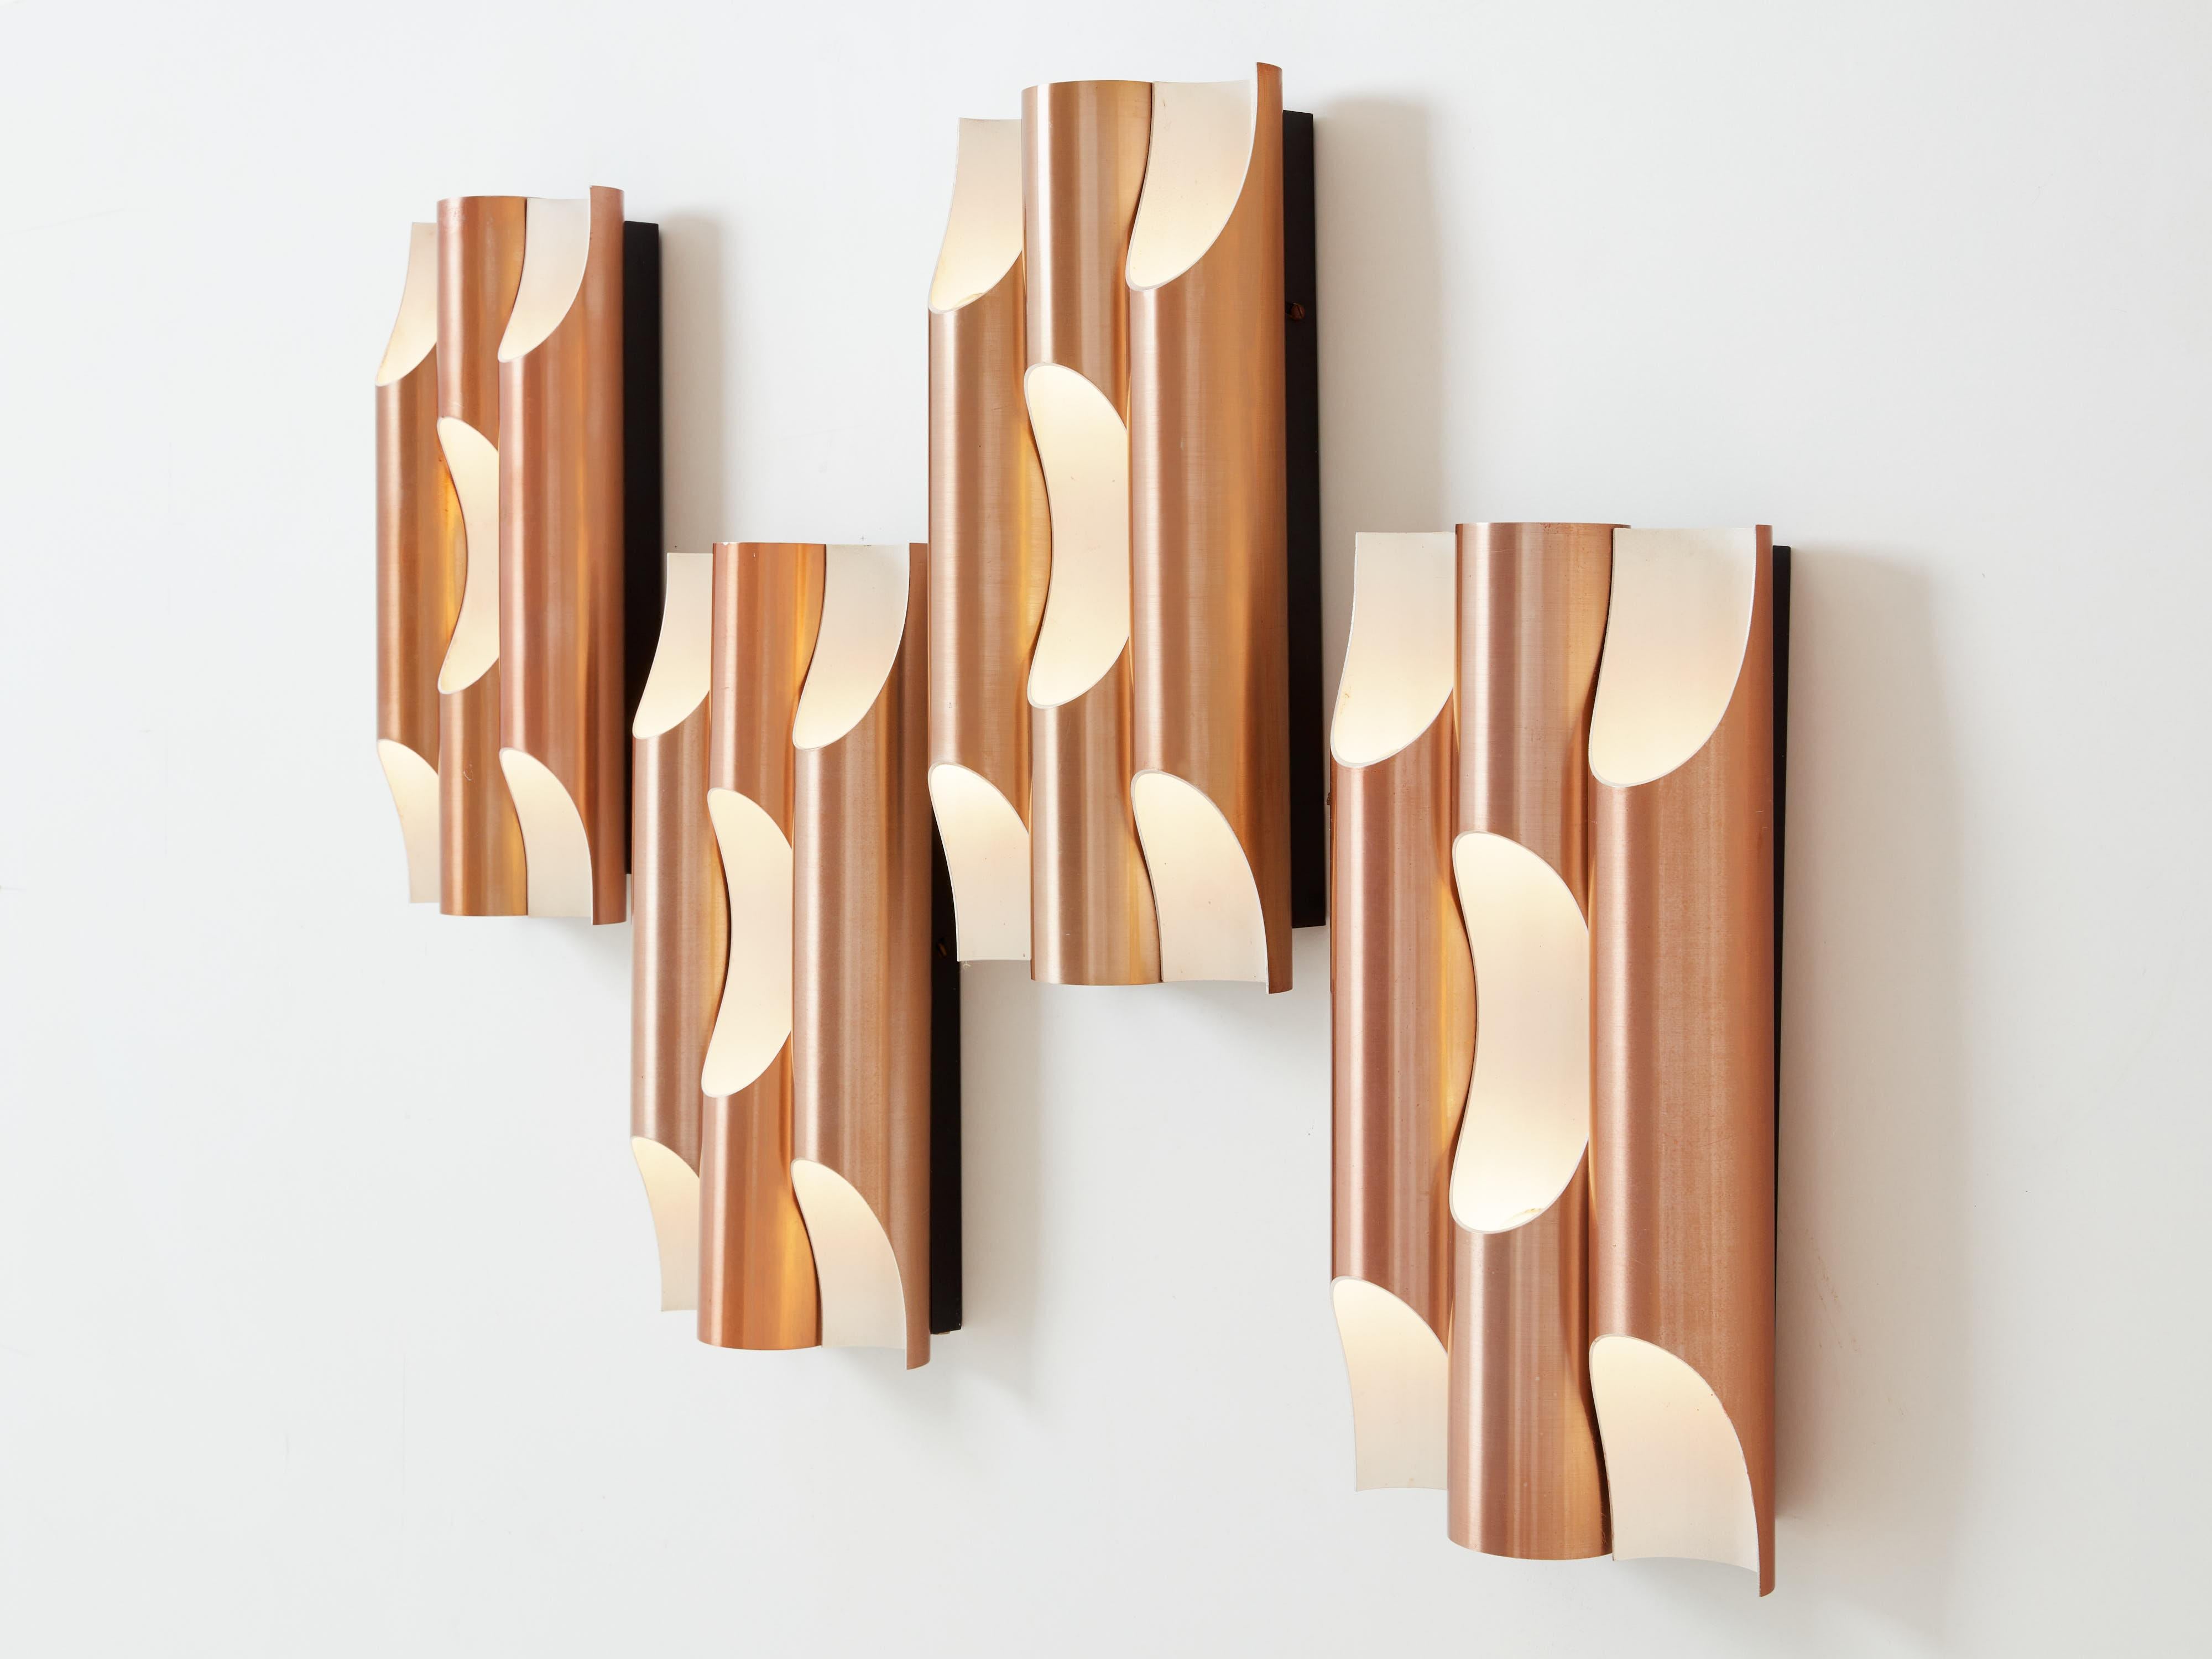 These beautiful Fuga wall lamps were designed at the end of the 1950s by the Finnish architect Maija Liisa Komulainen for RAAK Amsterdam. Each wall light is made of three tubes, designed as organ pipes, made out of aluminium, copper plated on the